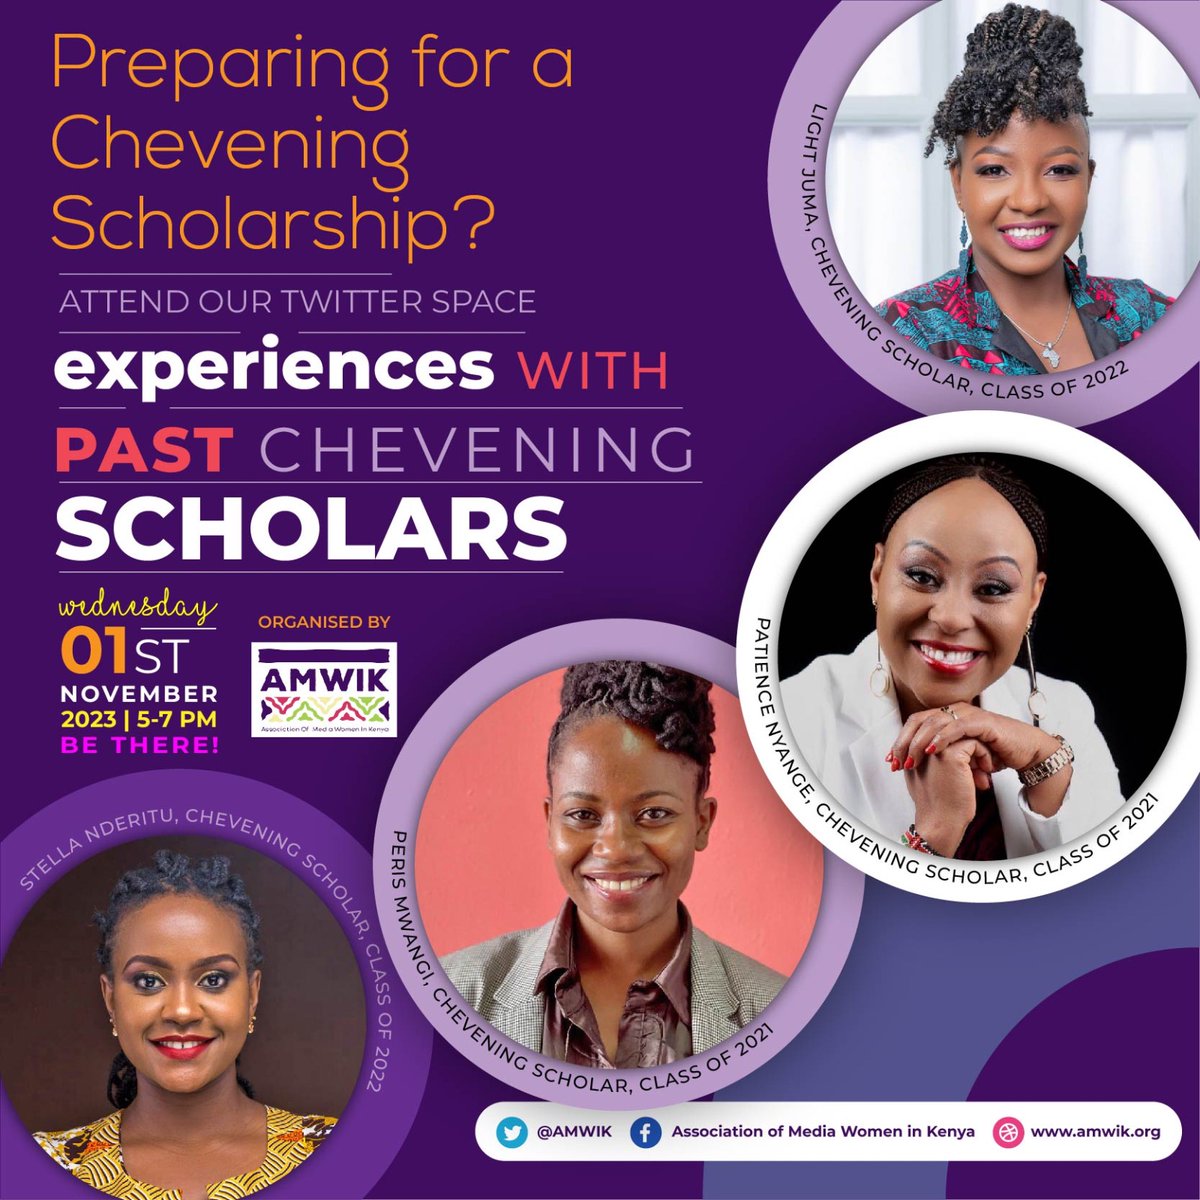 The Chevening Scholarship is your chance to pursue a fully-funded master's degree in the United Kingdom and become part of a global network of future leaders. Plan to join our #XSpaceEvent as we host past scholars on their experiences and how you can also apply successfully.